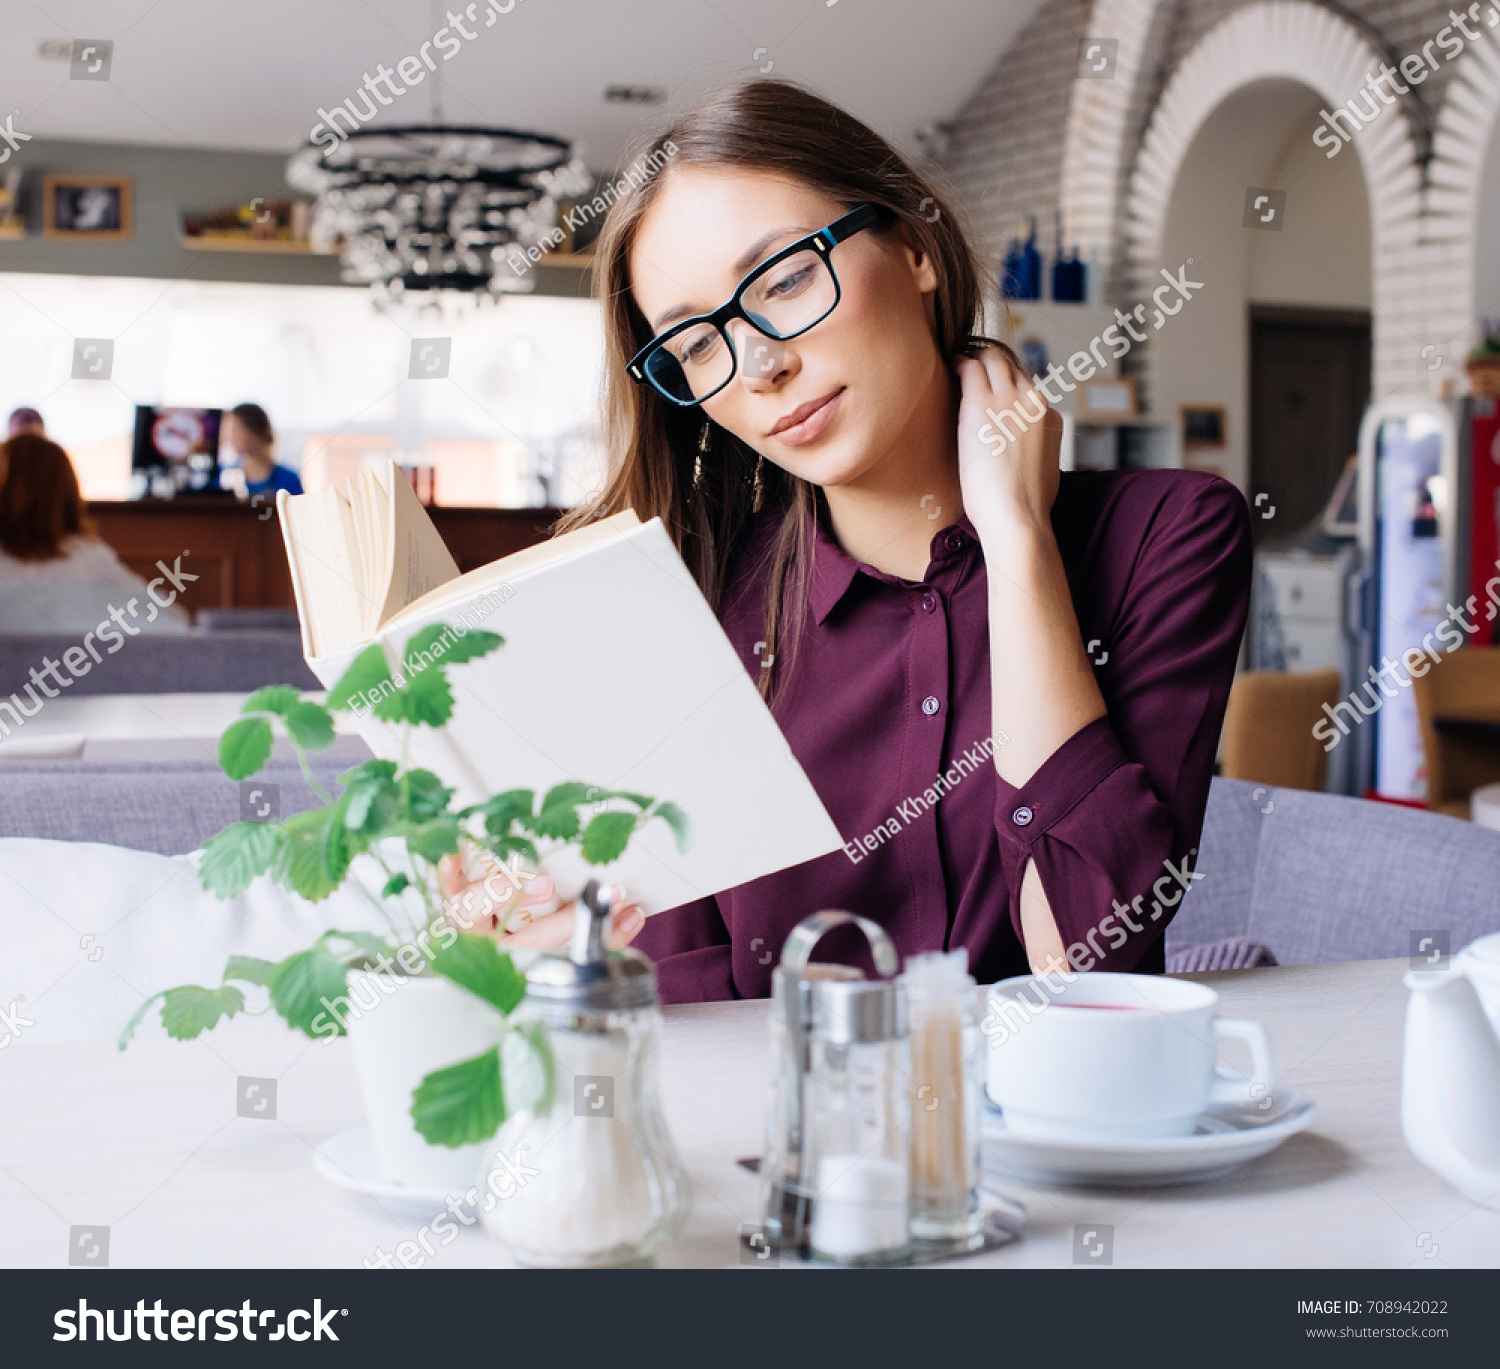 Concentrated at work. Confident young woman in smart casual wear working on laptop while sitting near window in creative office or cafe. #708942022